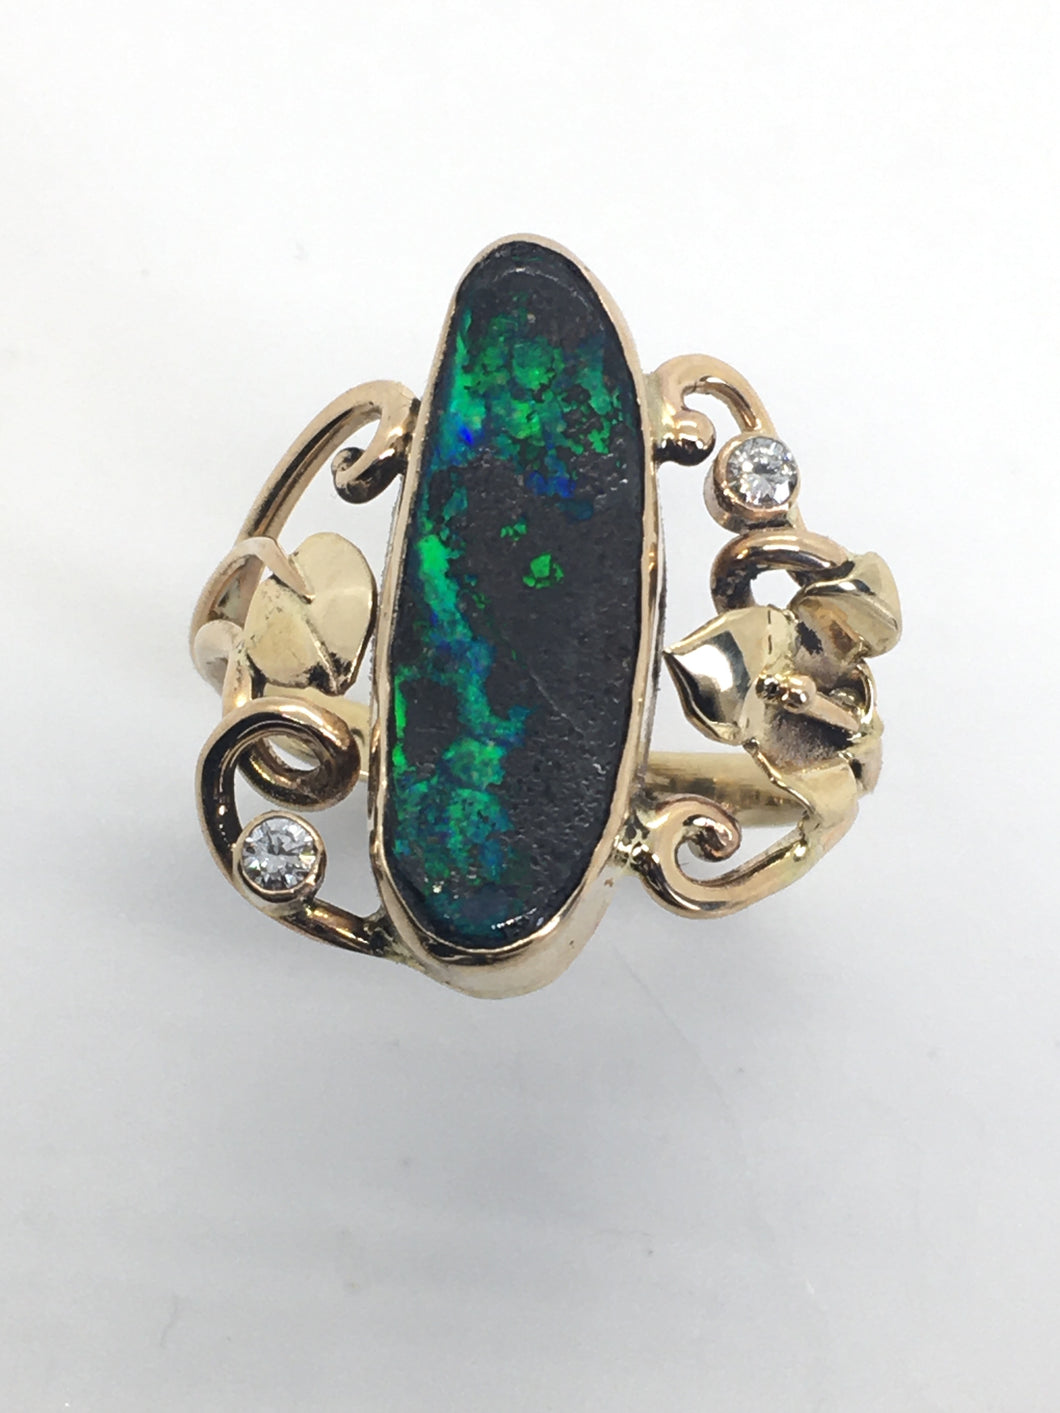 Boulder Opal Ring with Diamonds, Leaves & Swirls